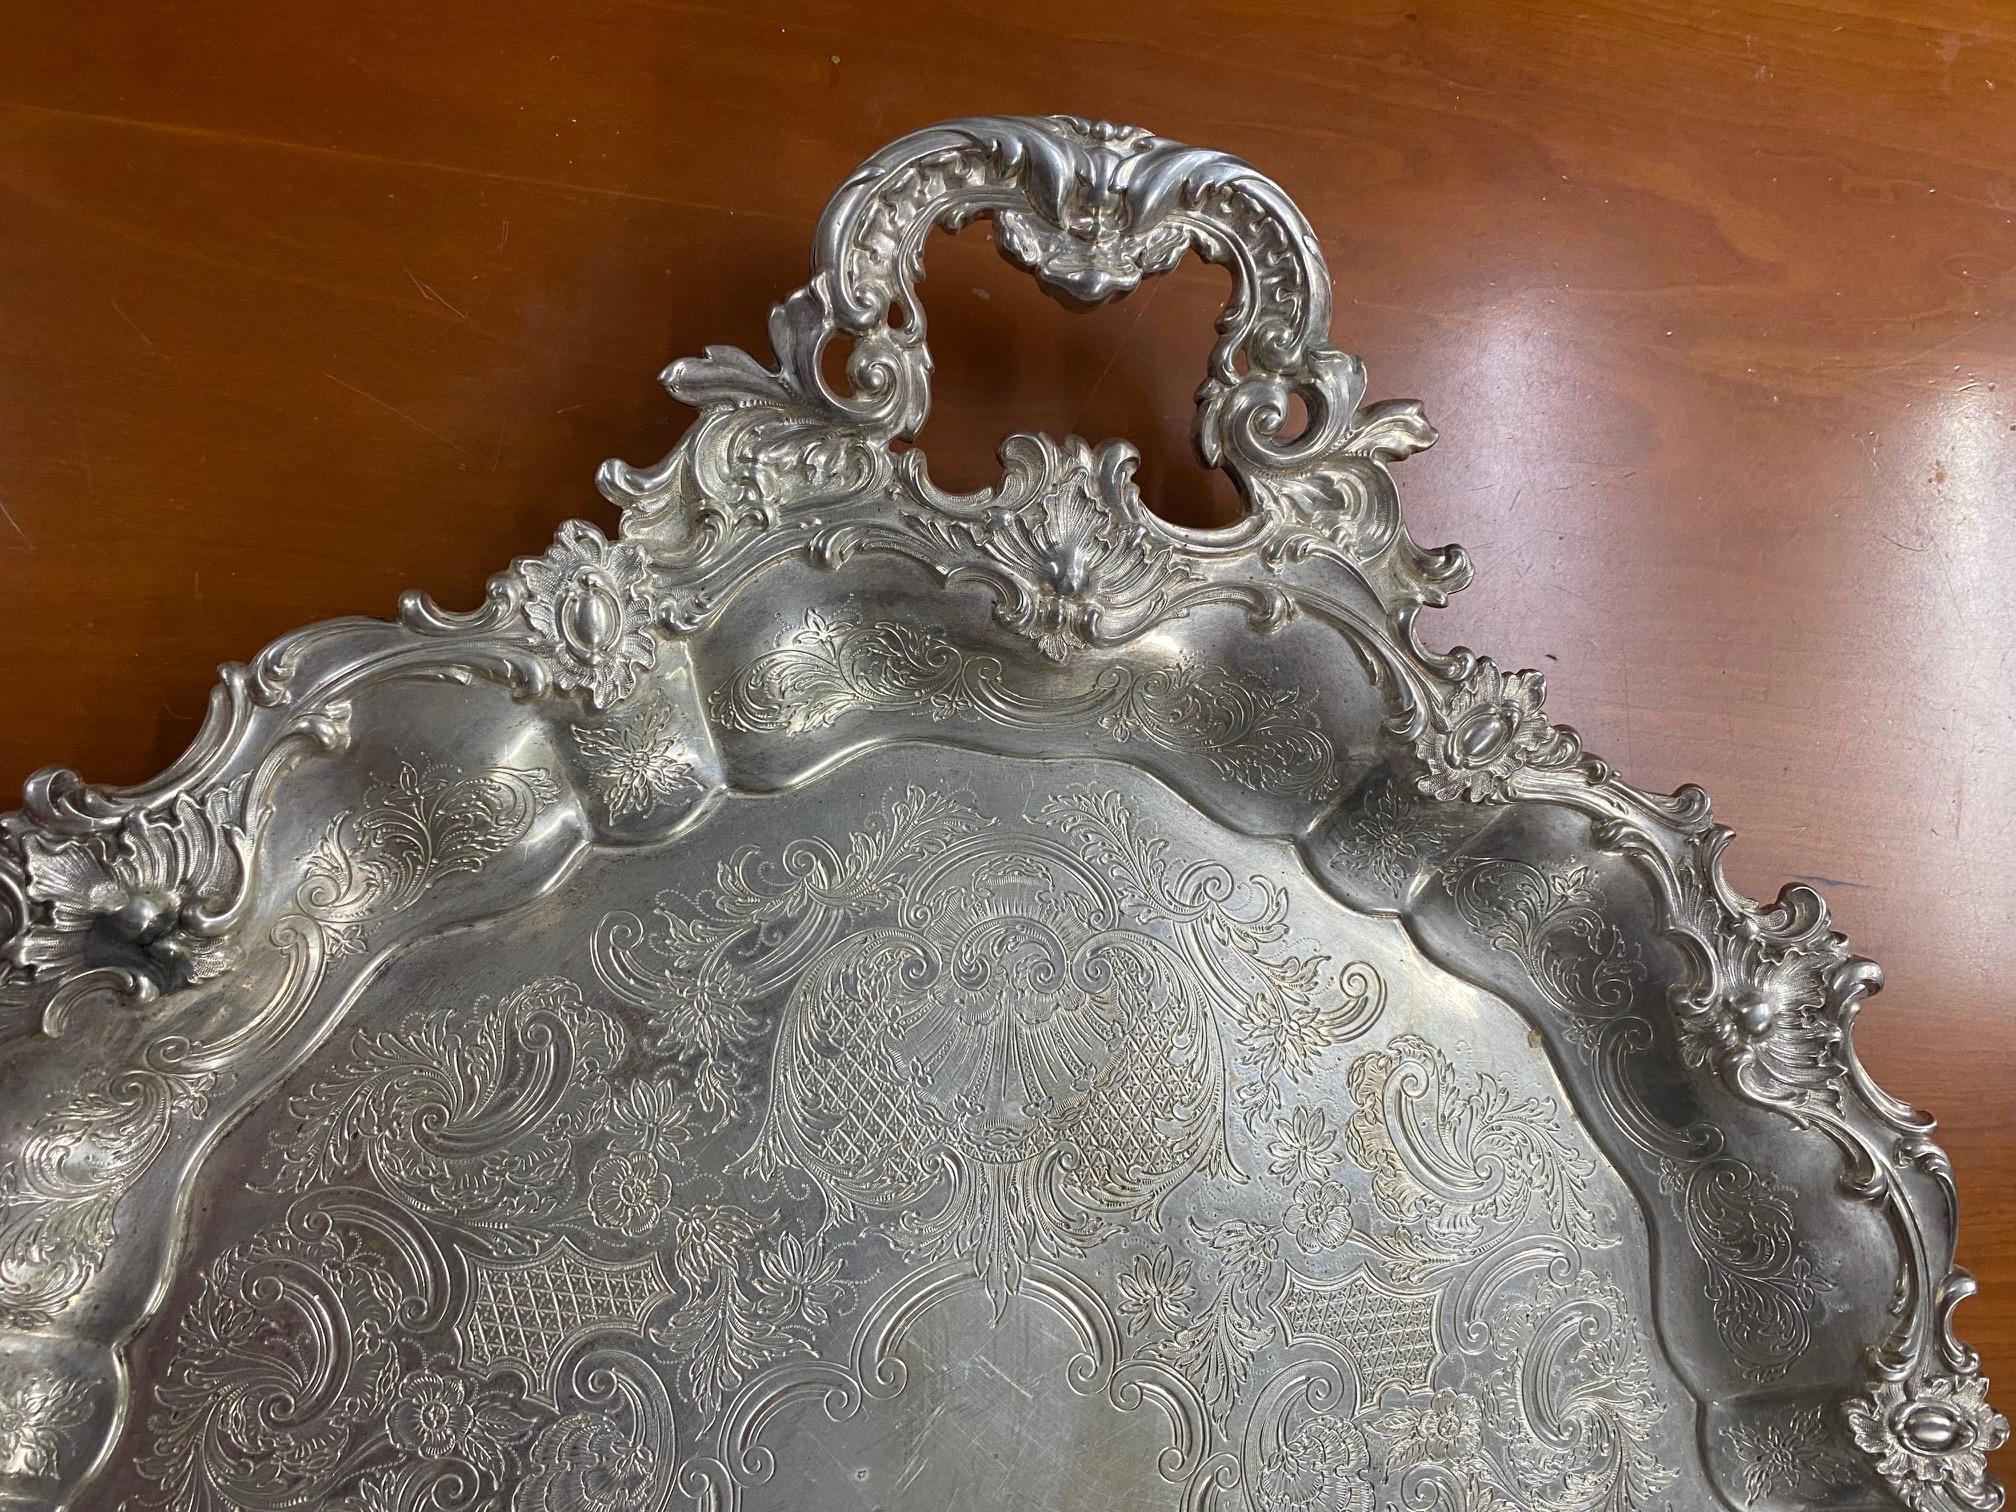 Goldsmiths & Silversmiths Large Victorian Silver Tray 165 Oz. Gorgeous!

Gorgeous Silver Tray made by Goldsmiths & Silversmiths of London
Appx 30